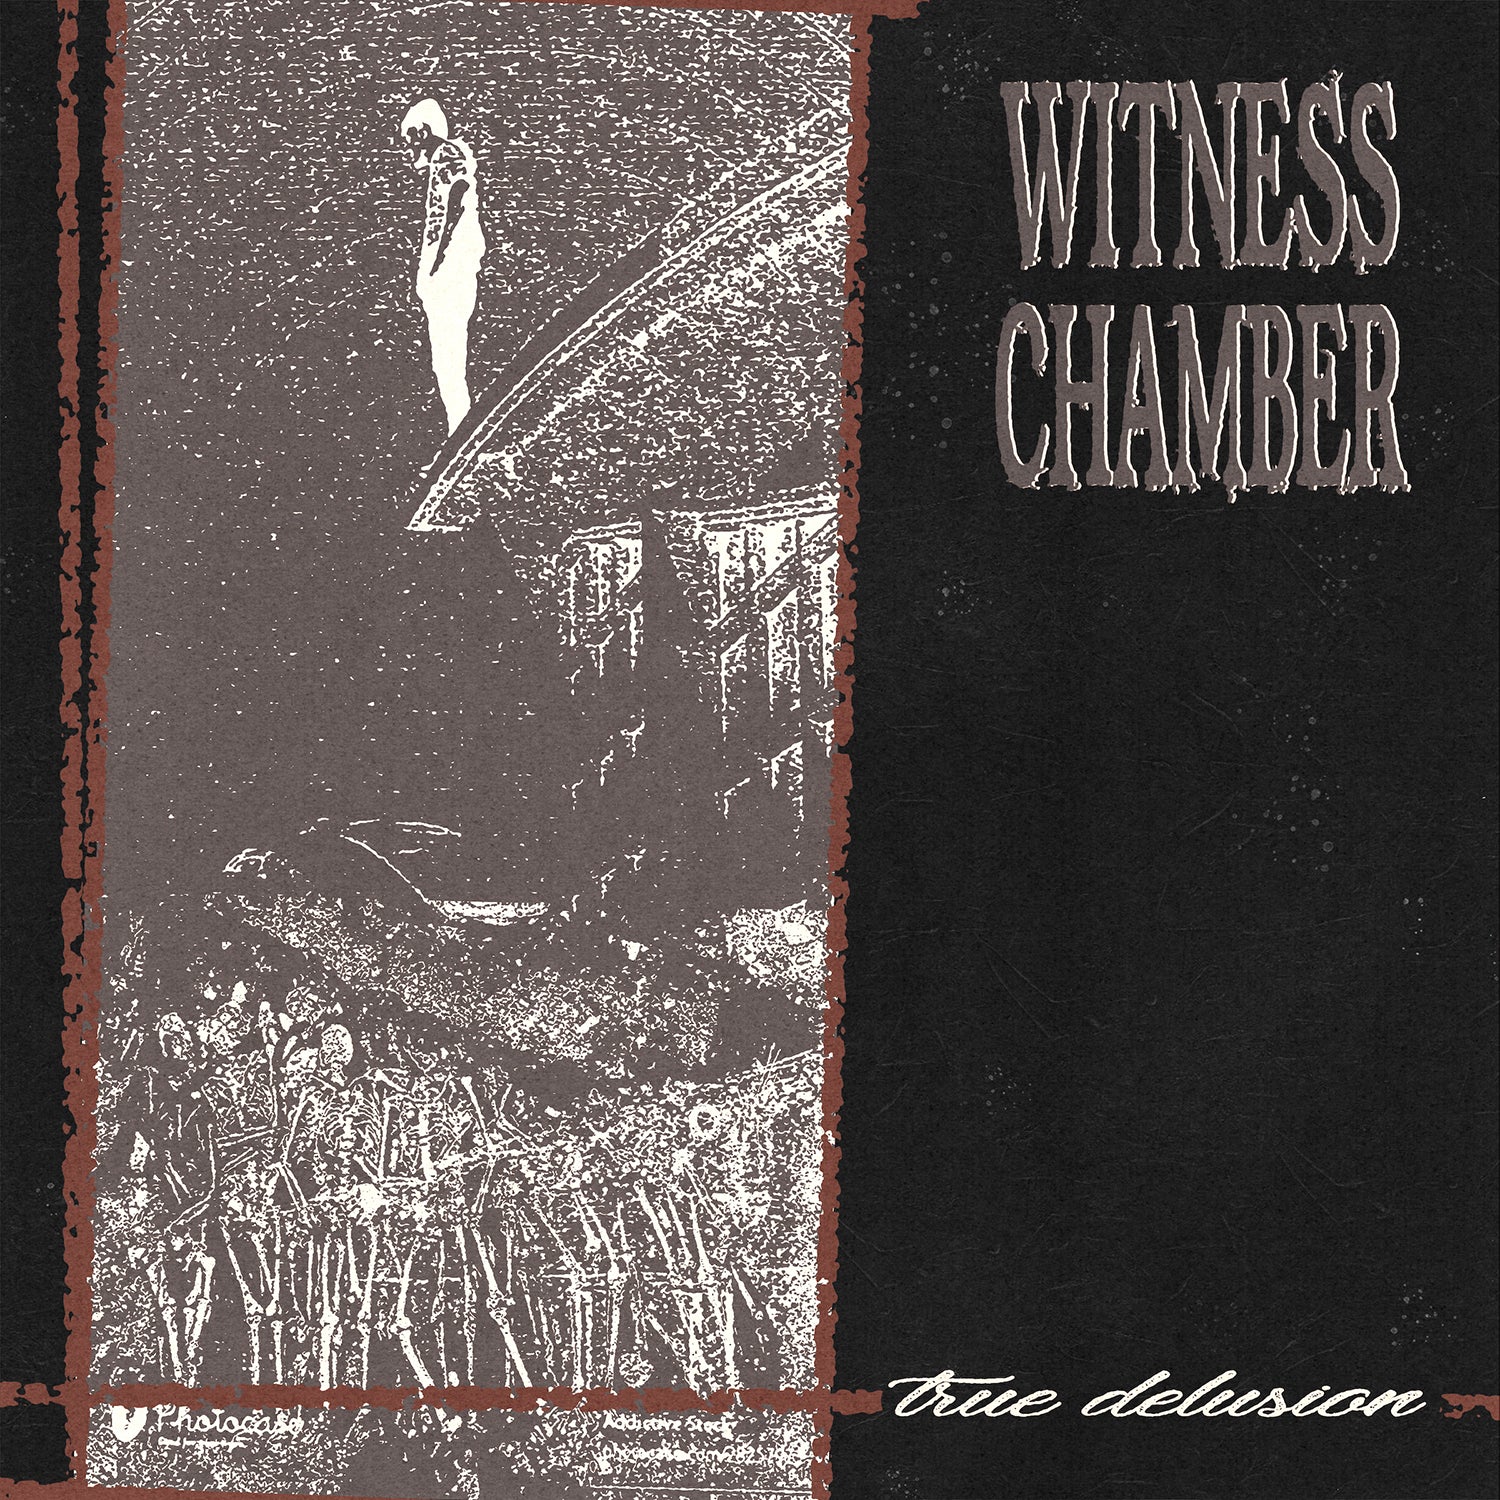 WITNESS CHAMBER "True Delusion" LP